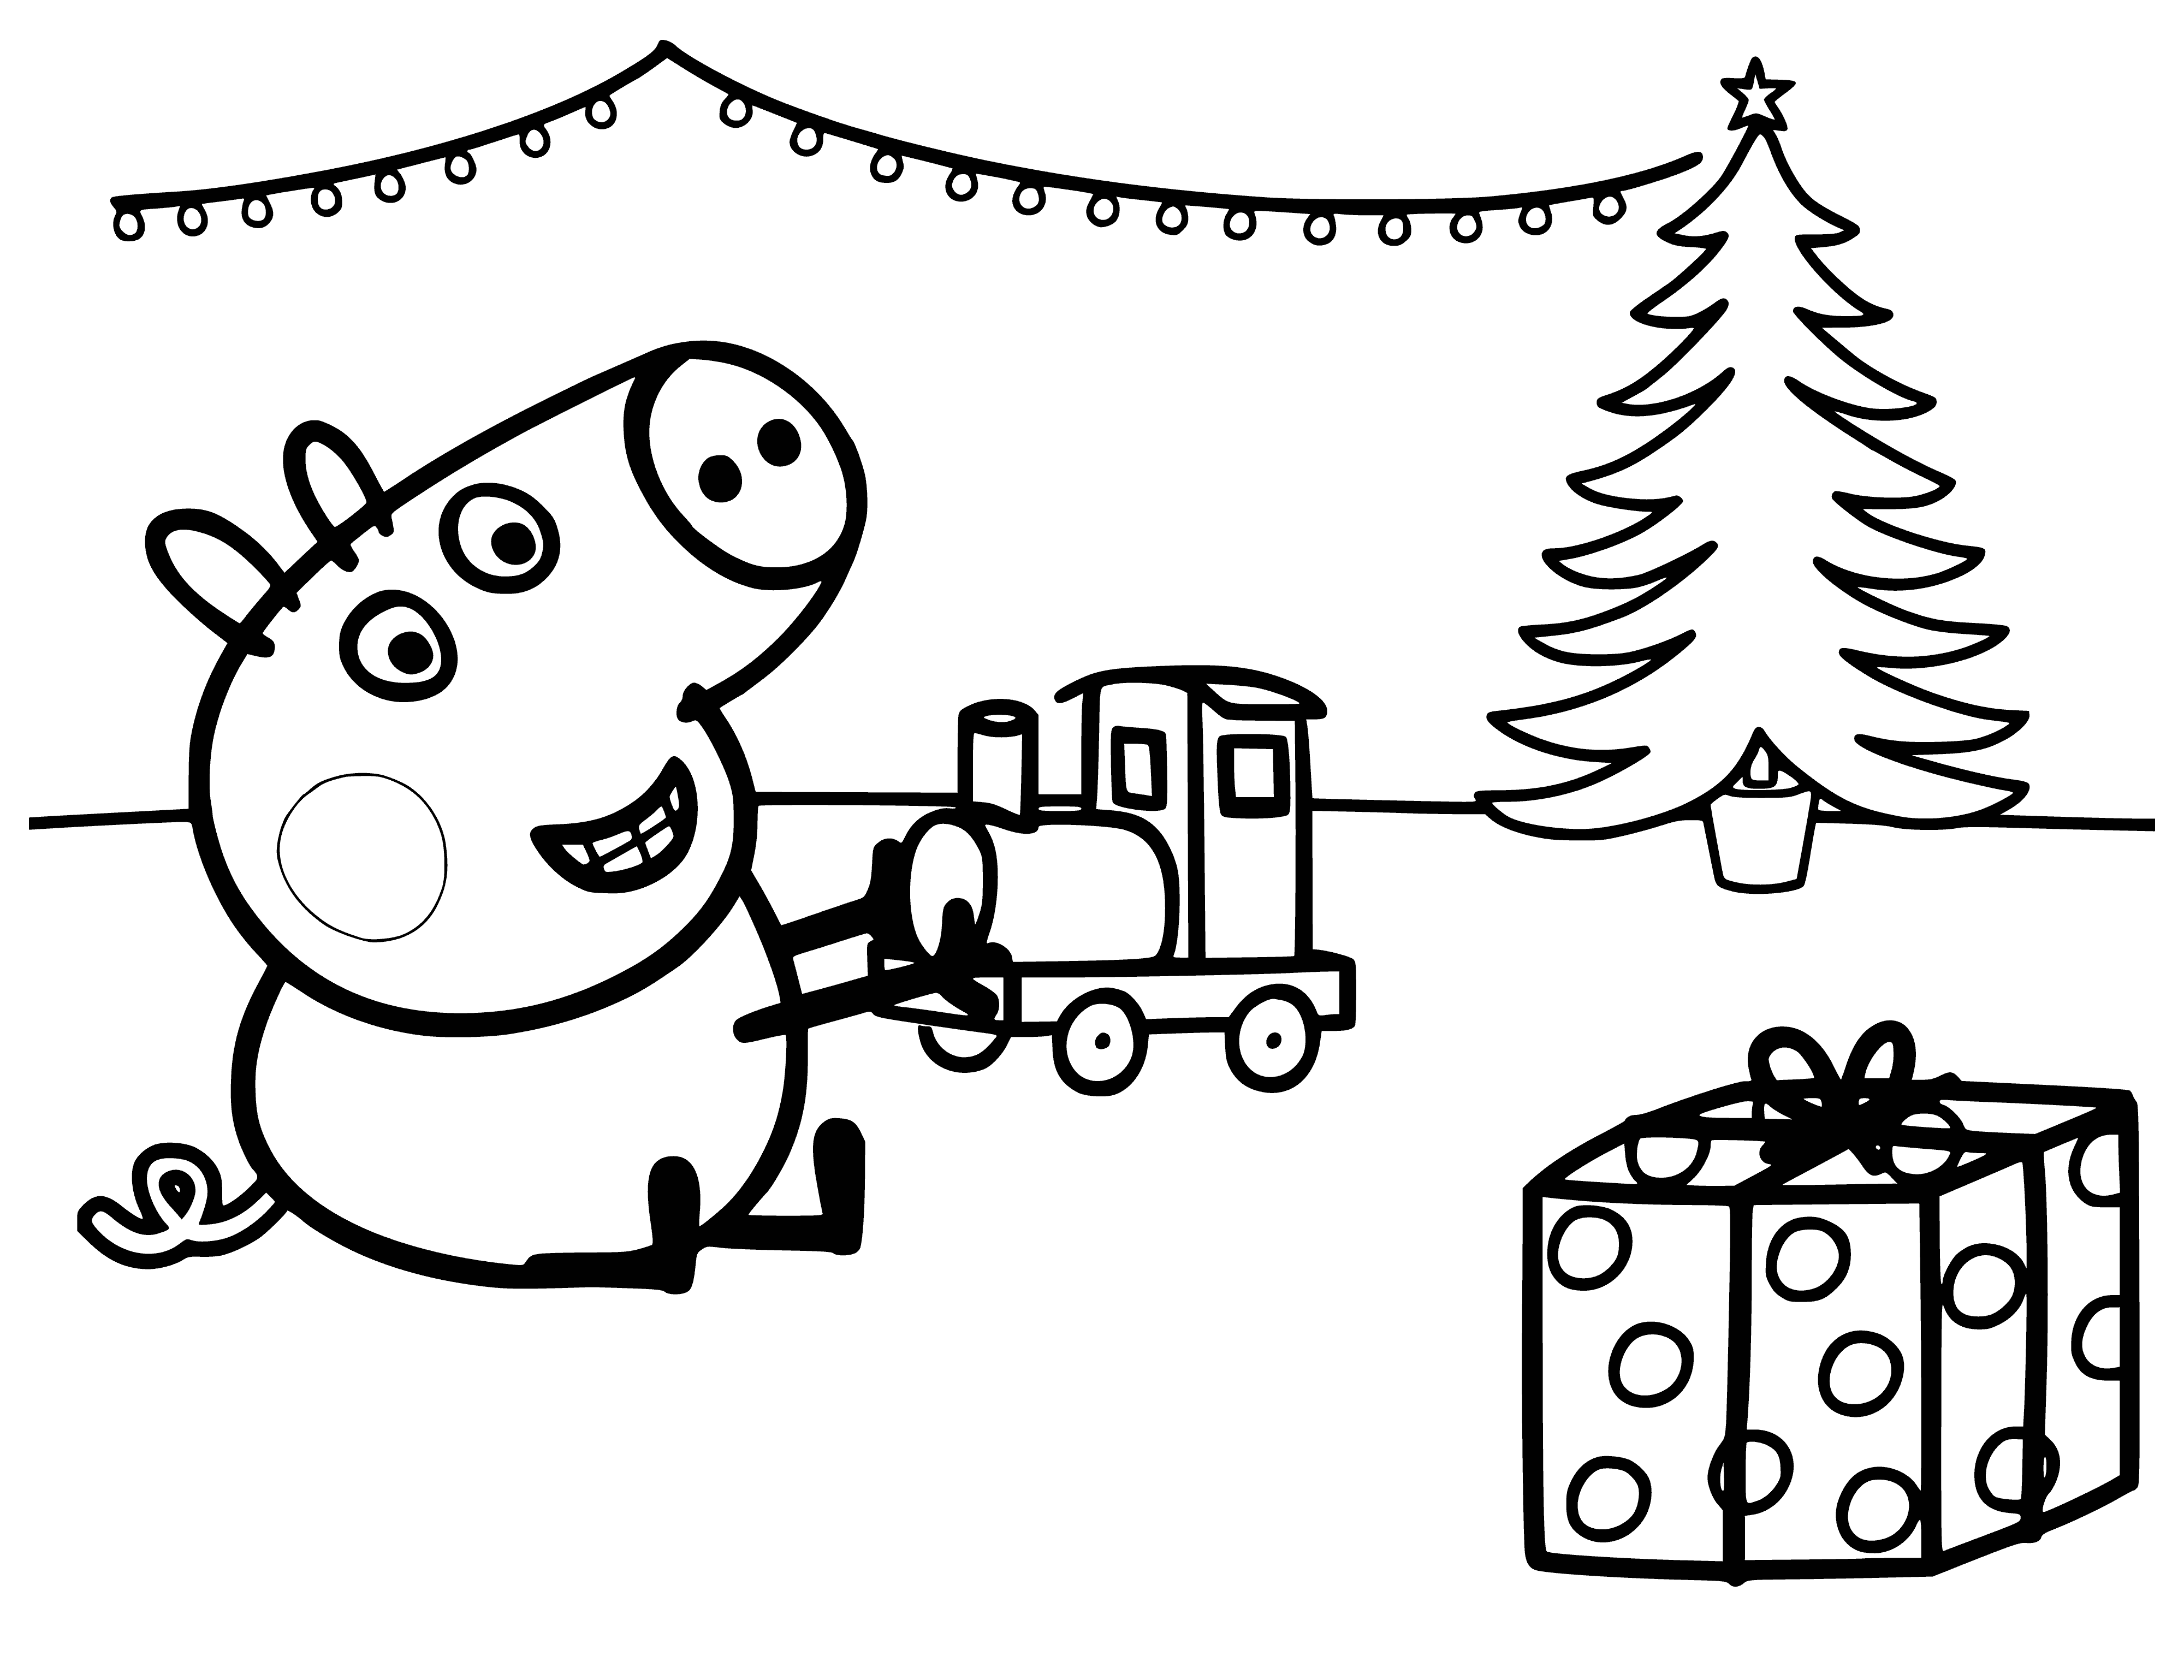 Gifts for the New Year coloring page